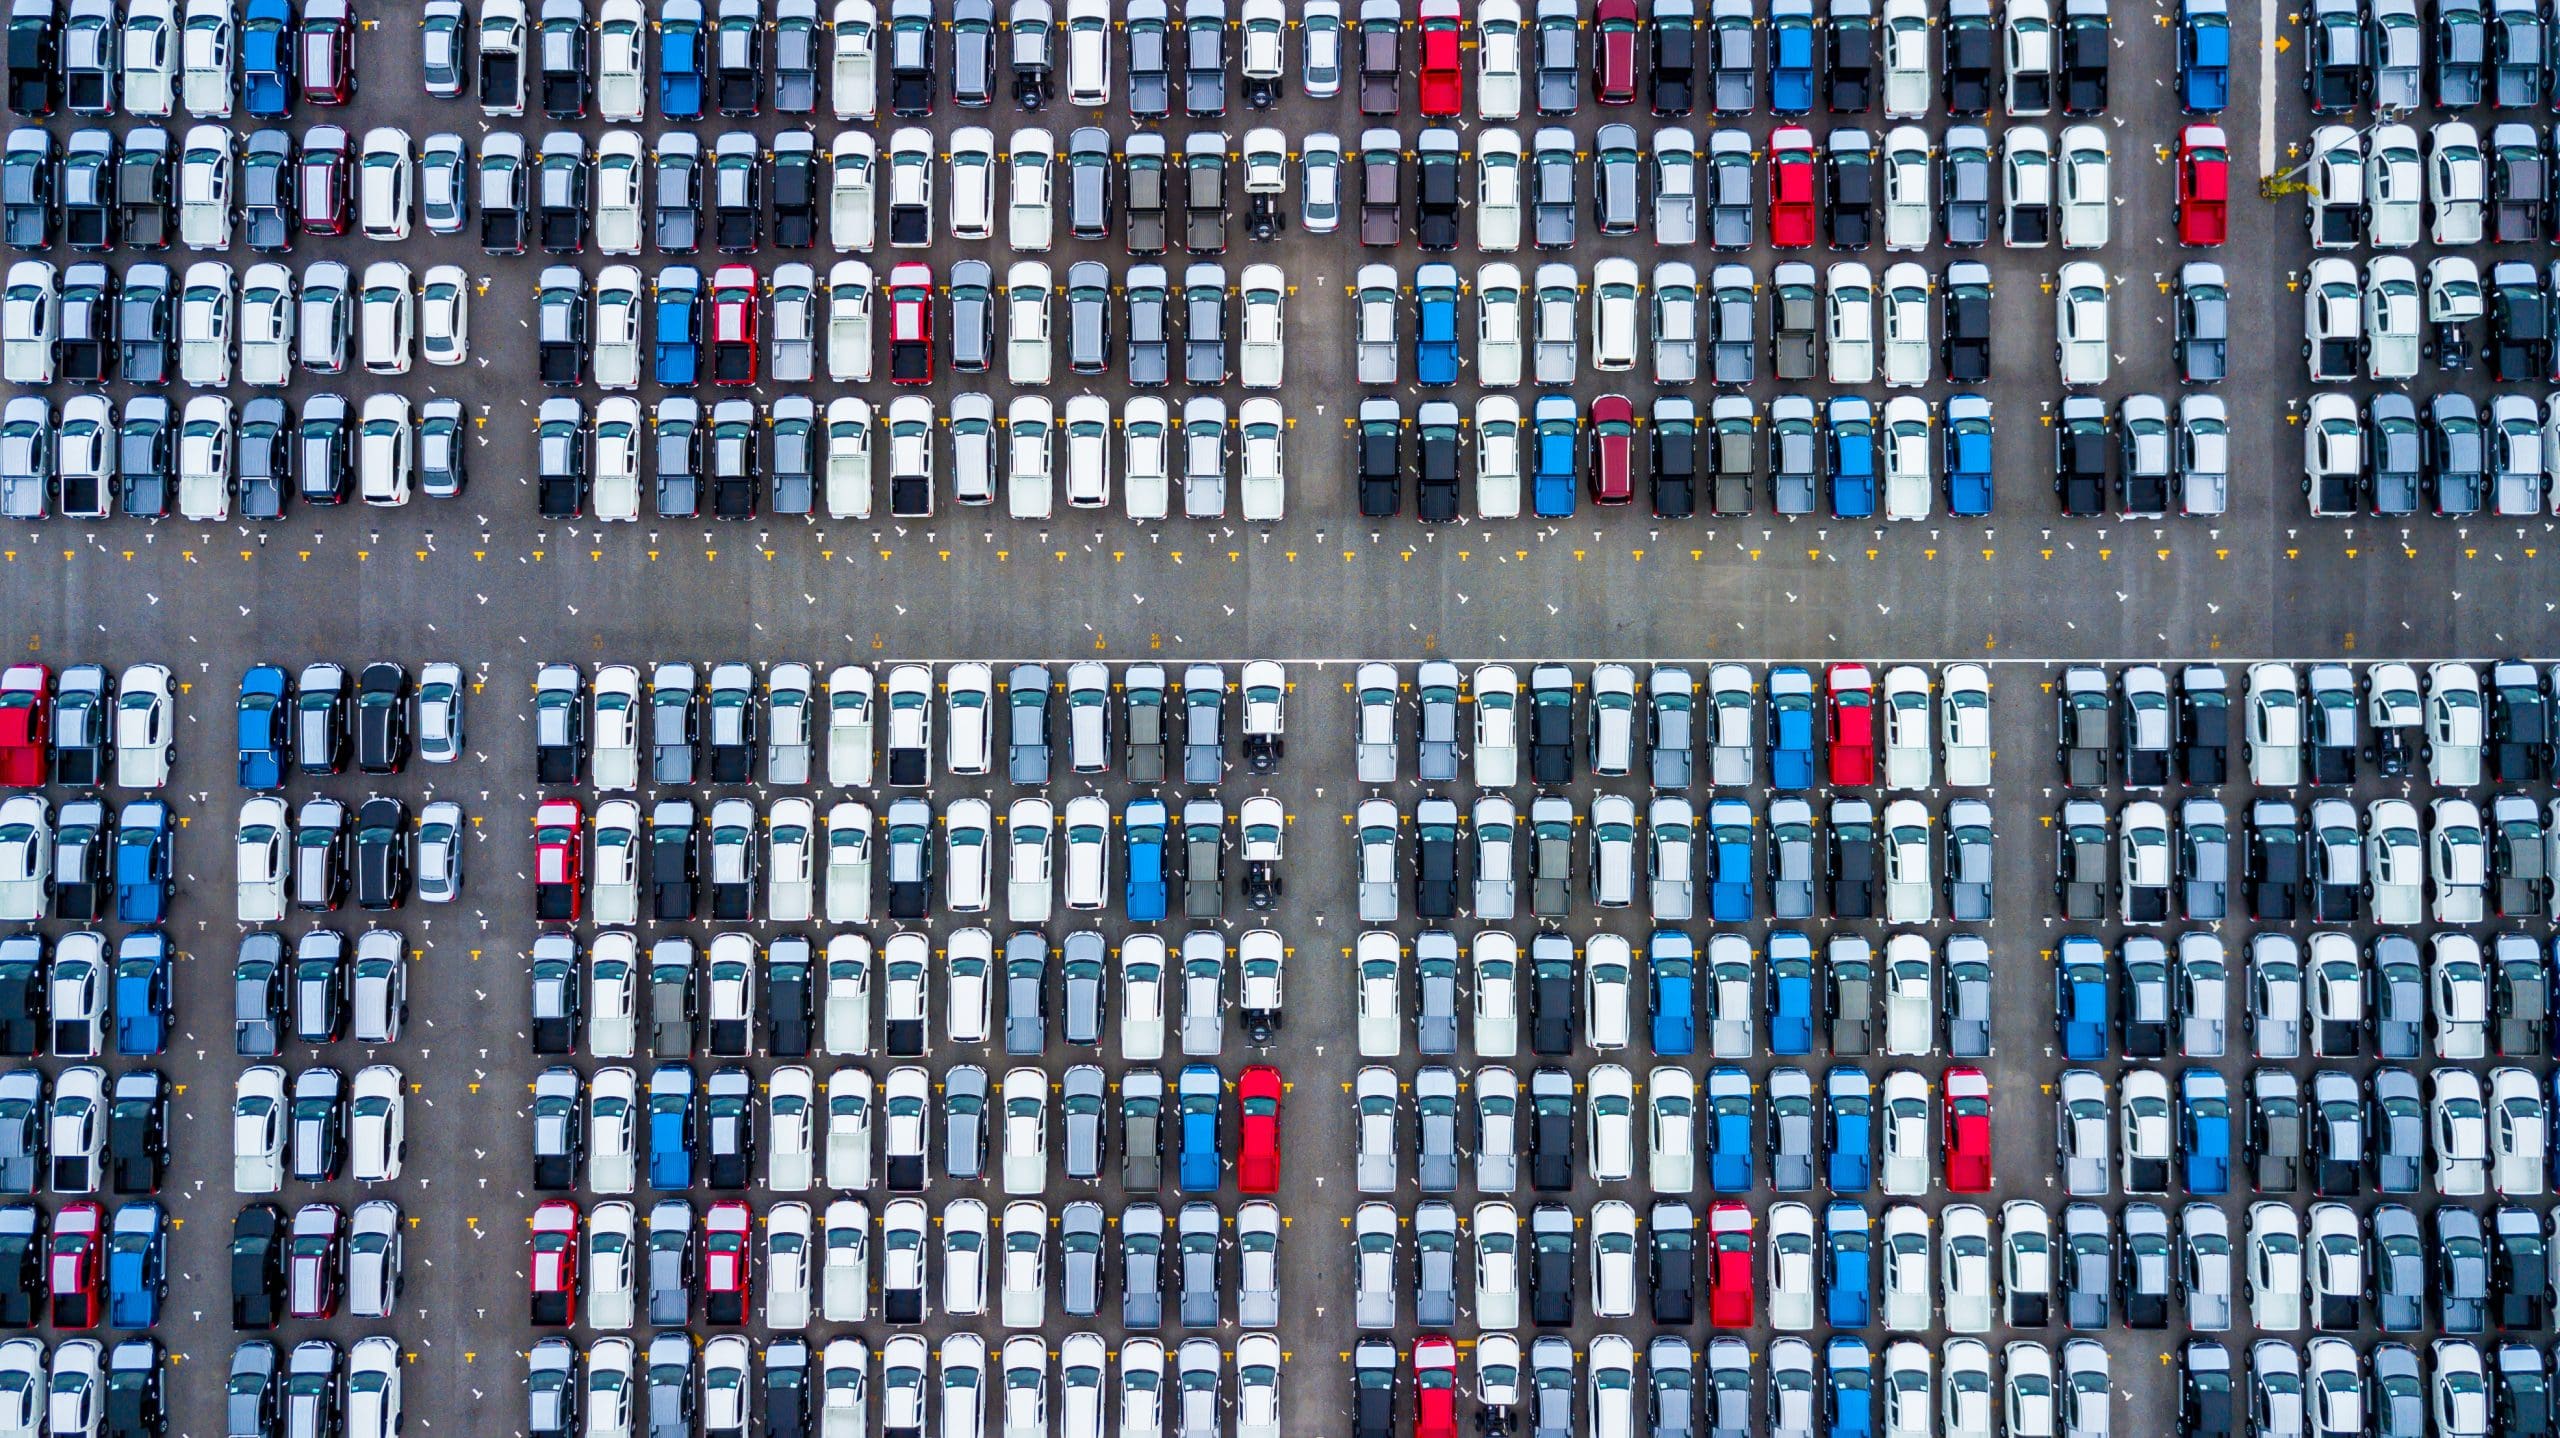 An aerial view of a parking lot full of cars.